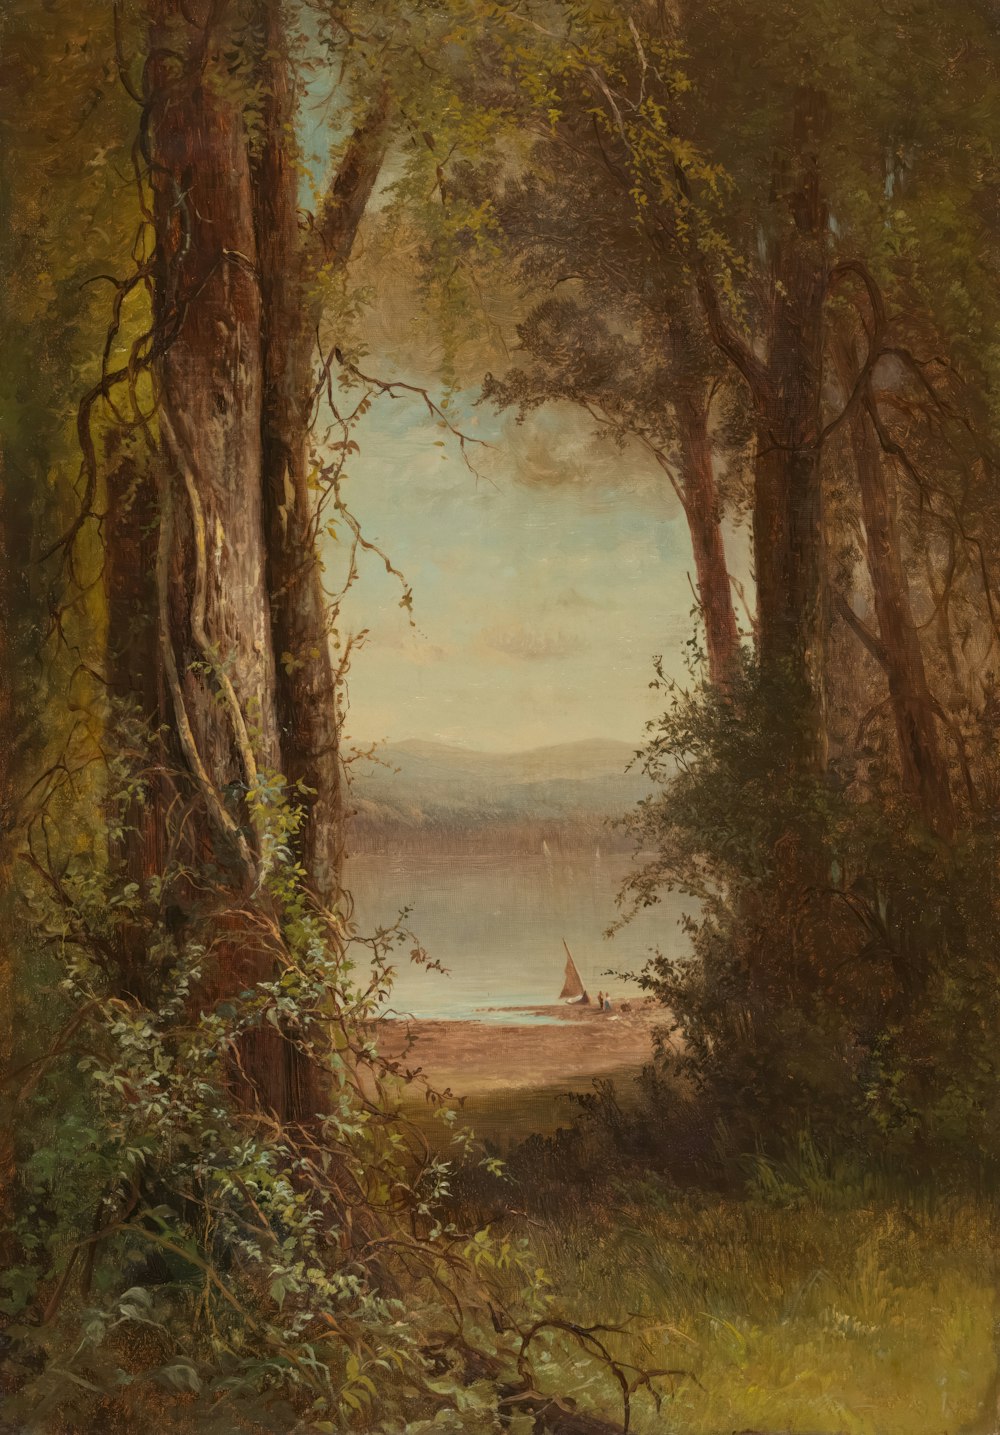 a painting of a boat in a lake surrounded by trees